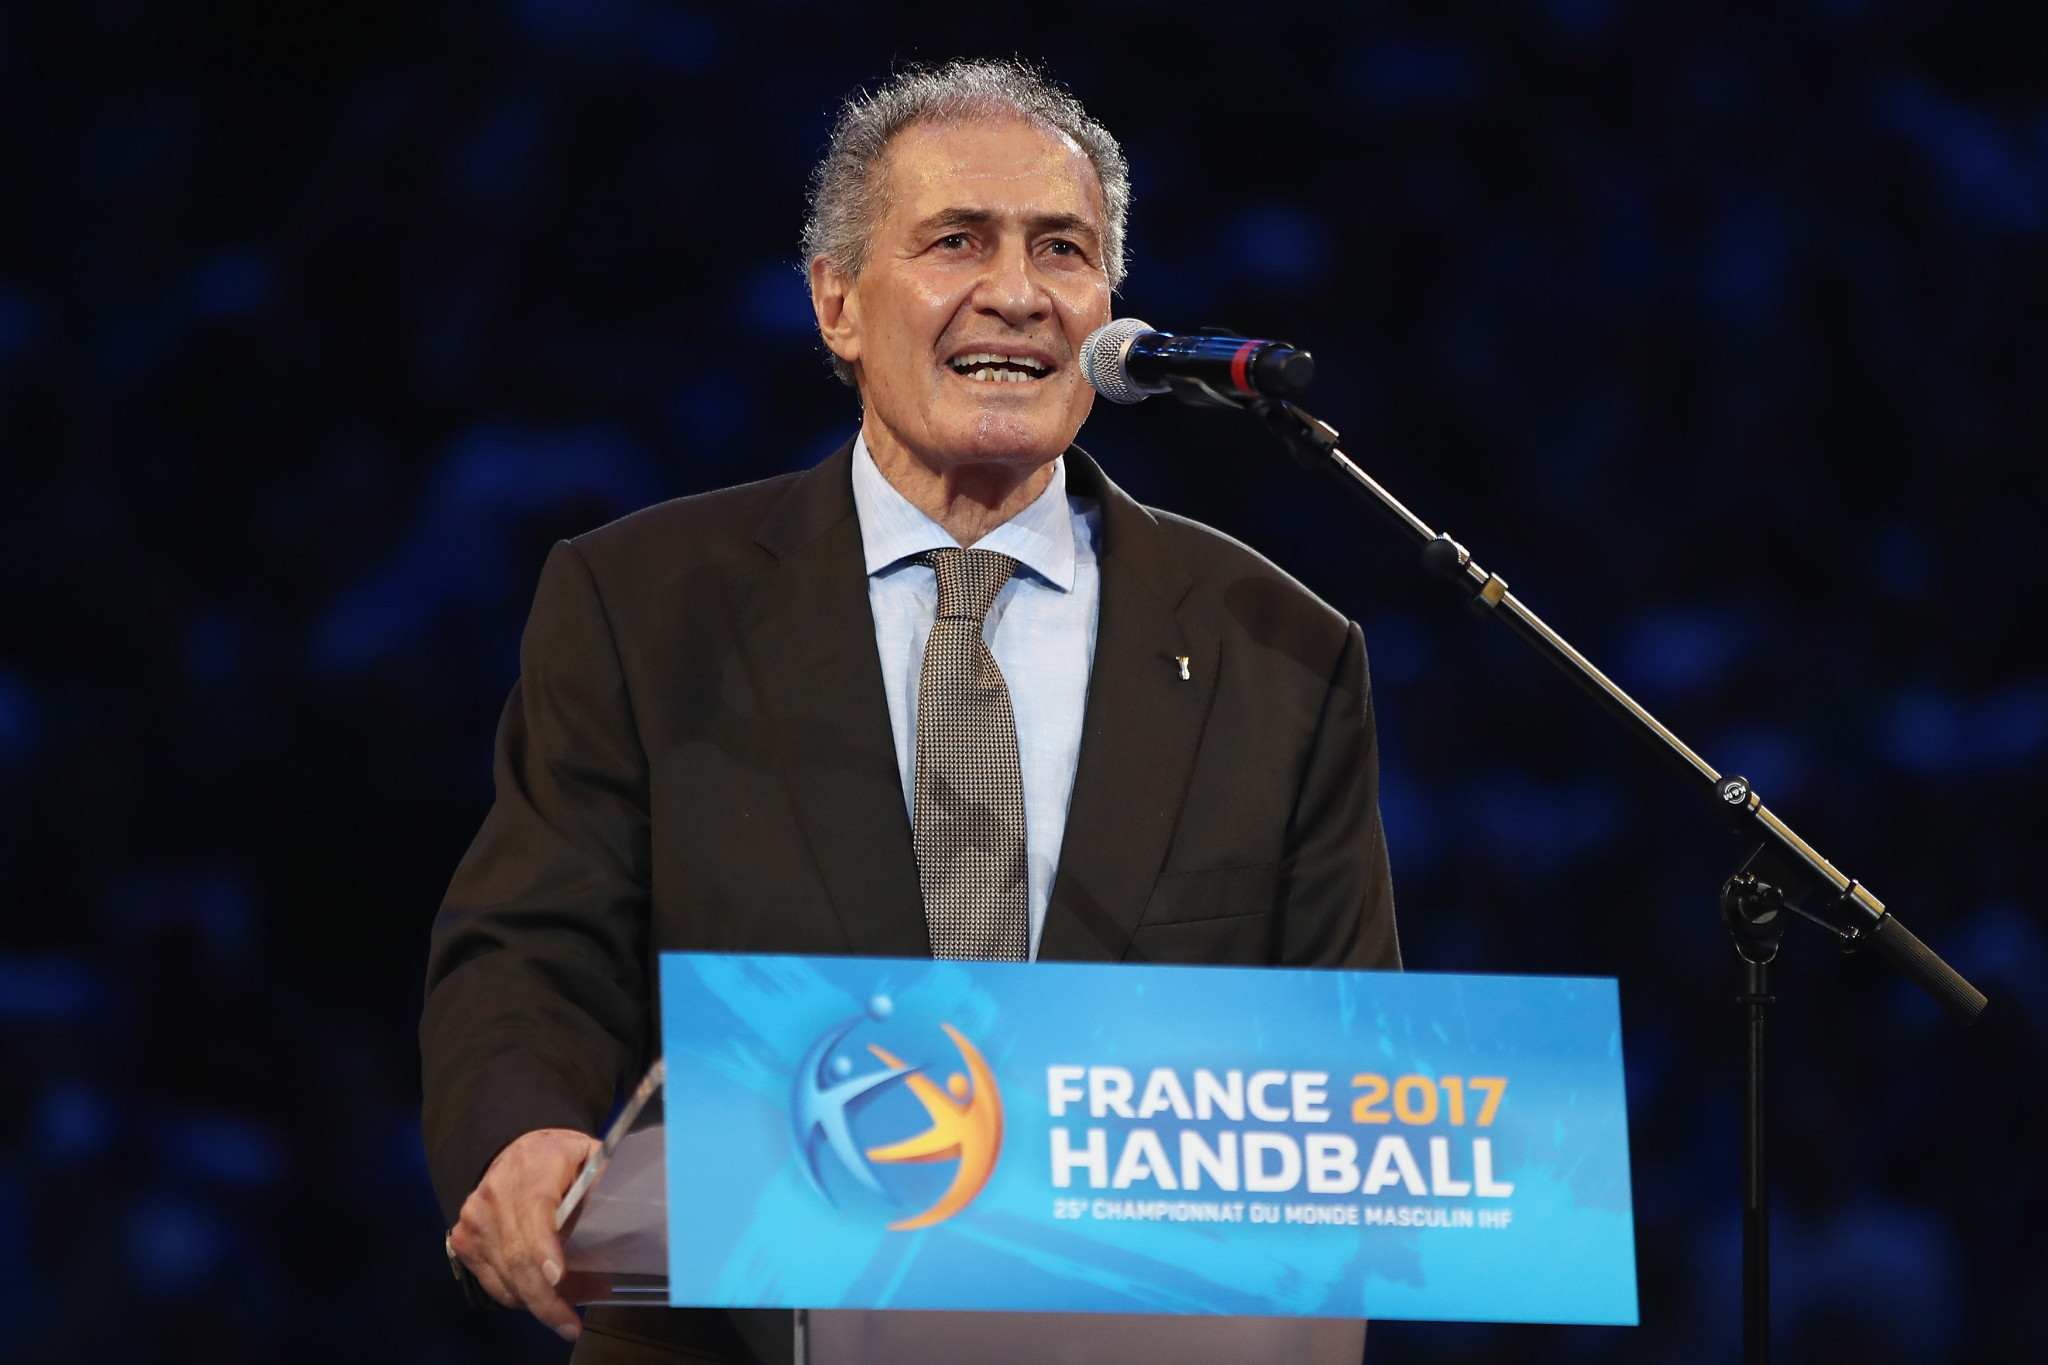 Moustafa set to be re-elected unopposed as President of International Handball Federation